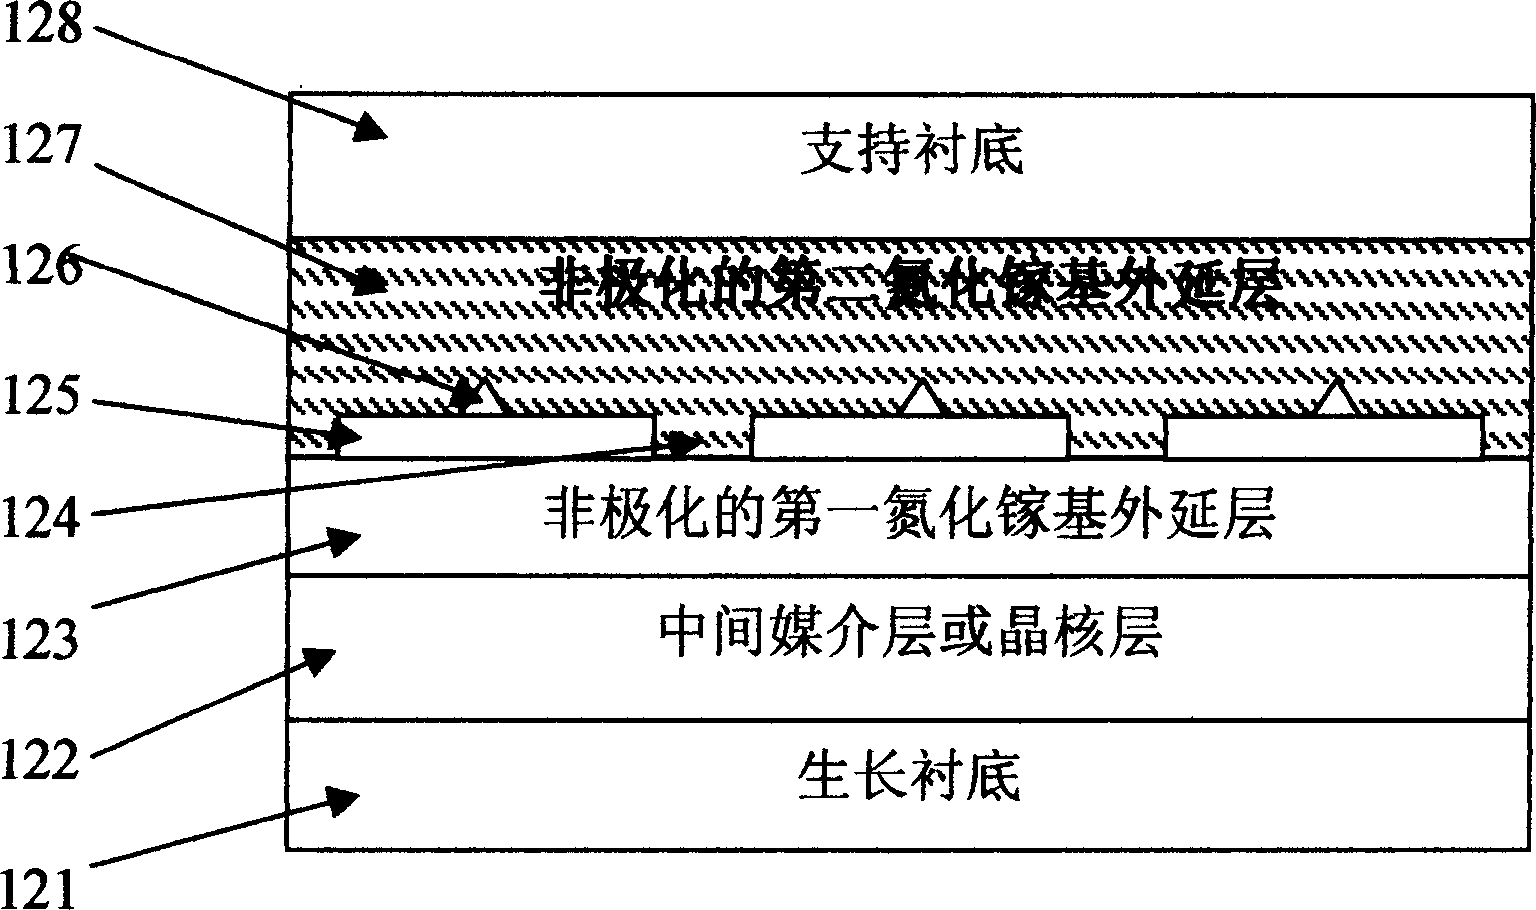 Non-polarized composite gallium nitride substrate lining and production method